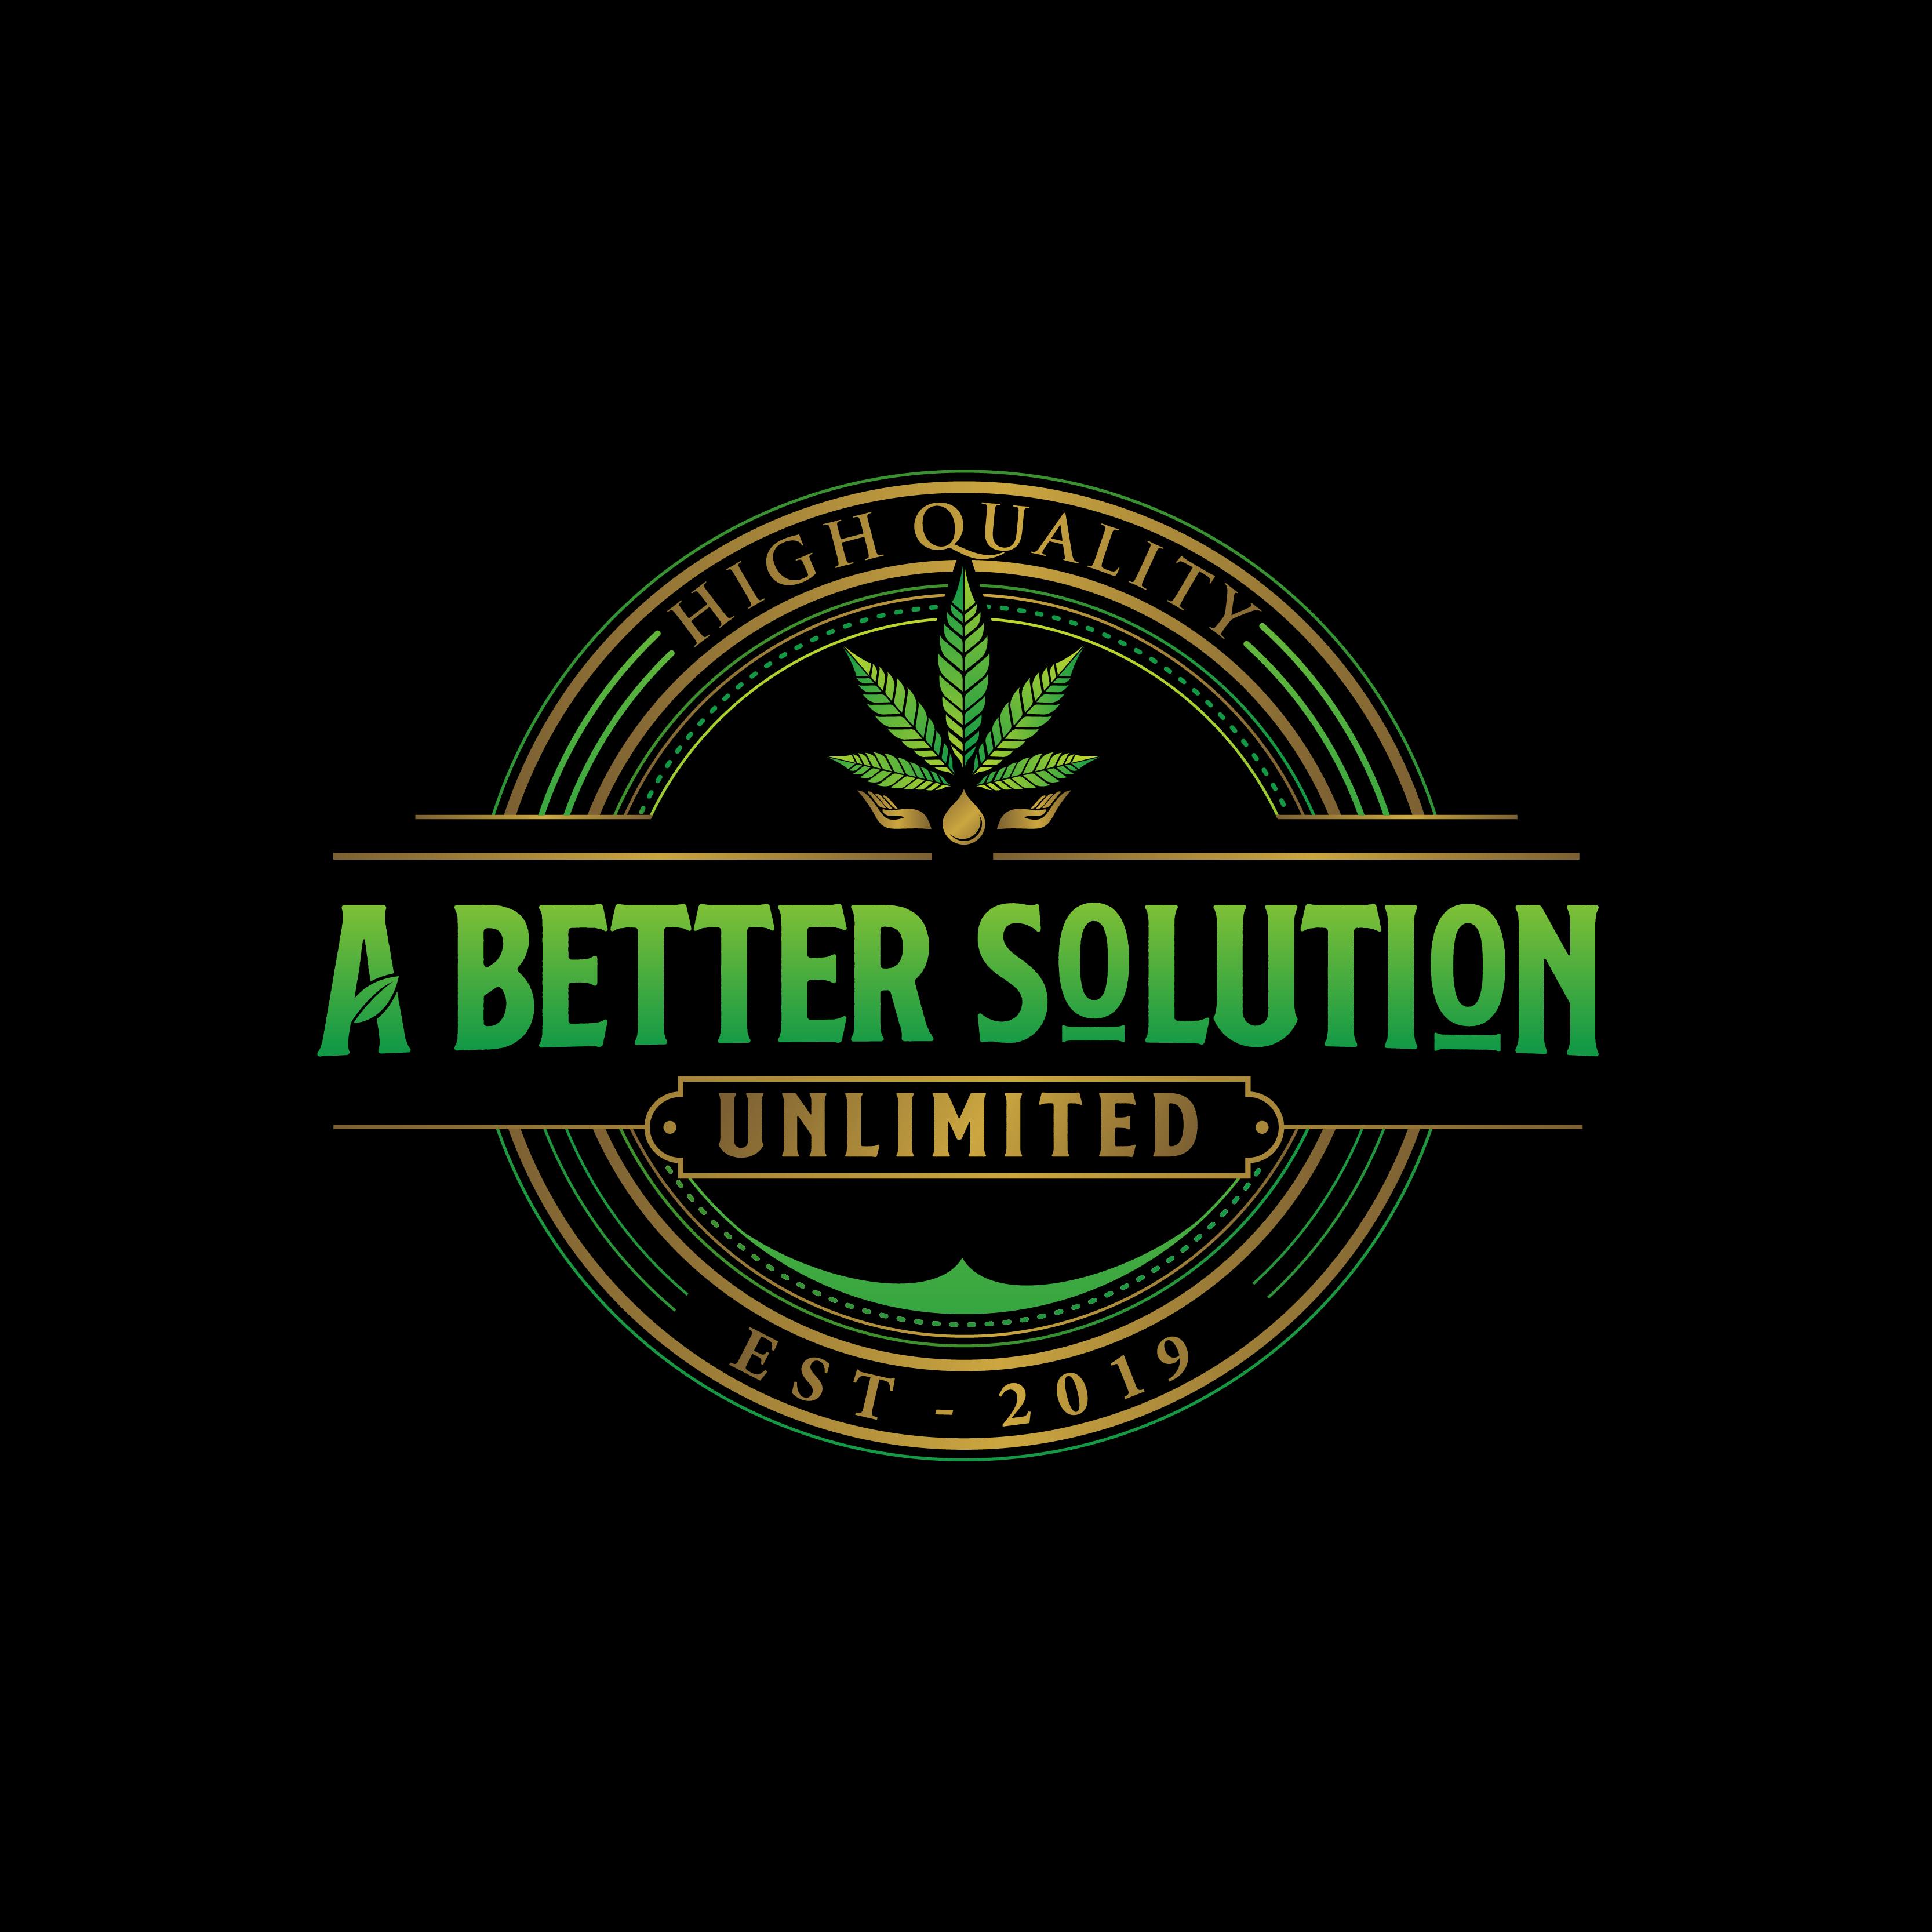 A Better Solution Unlimited